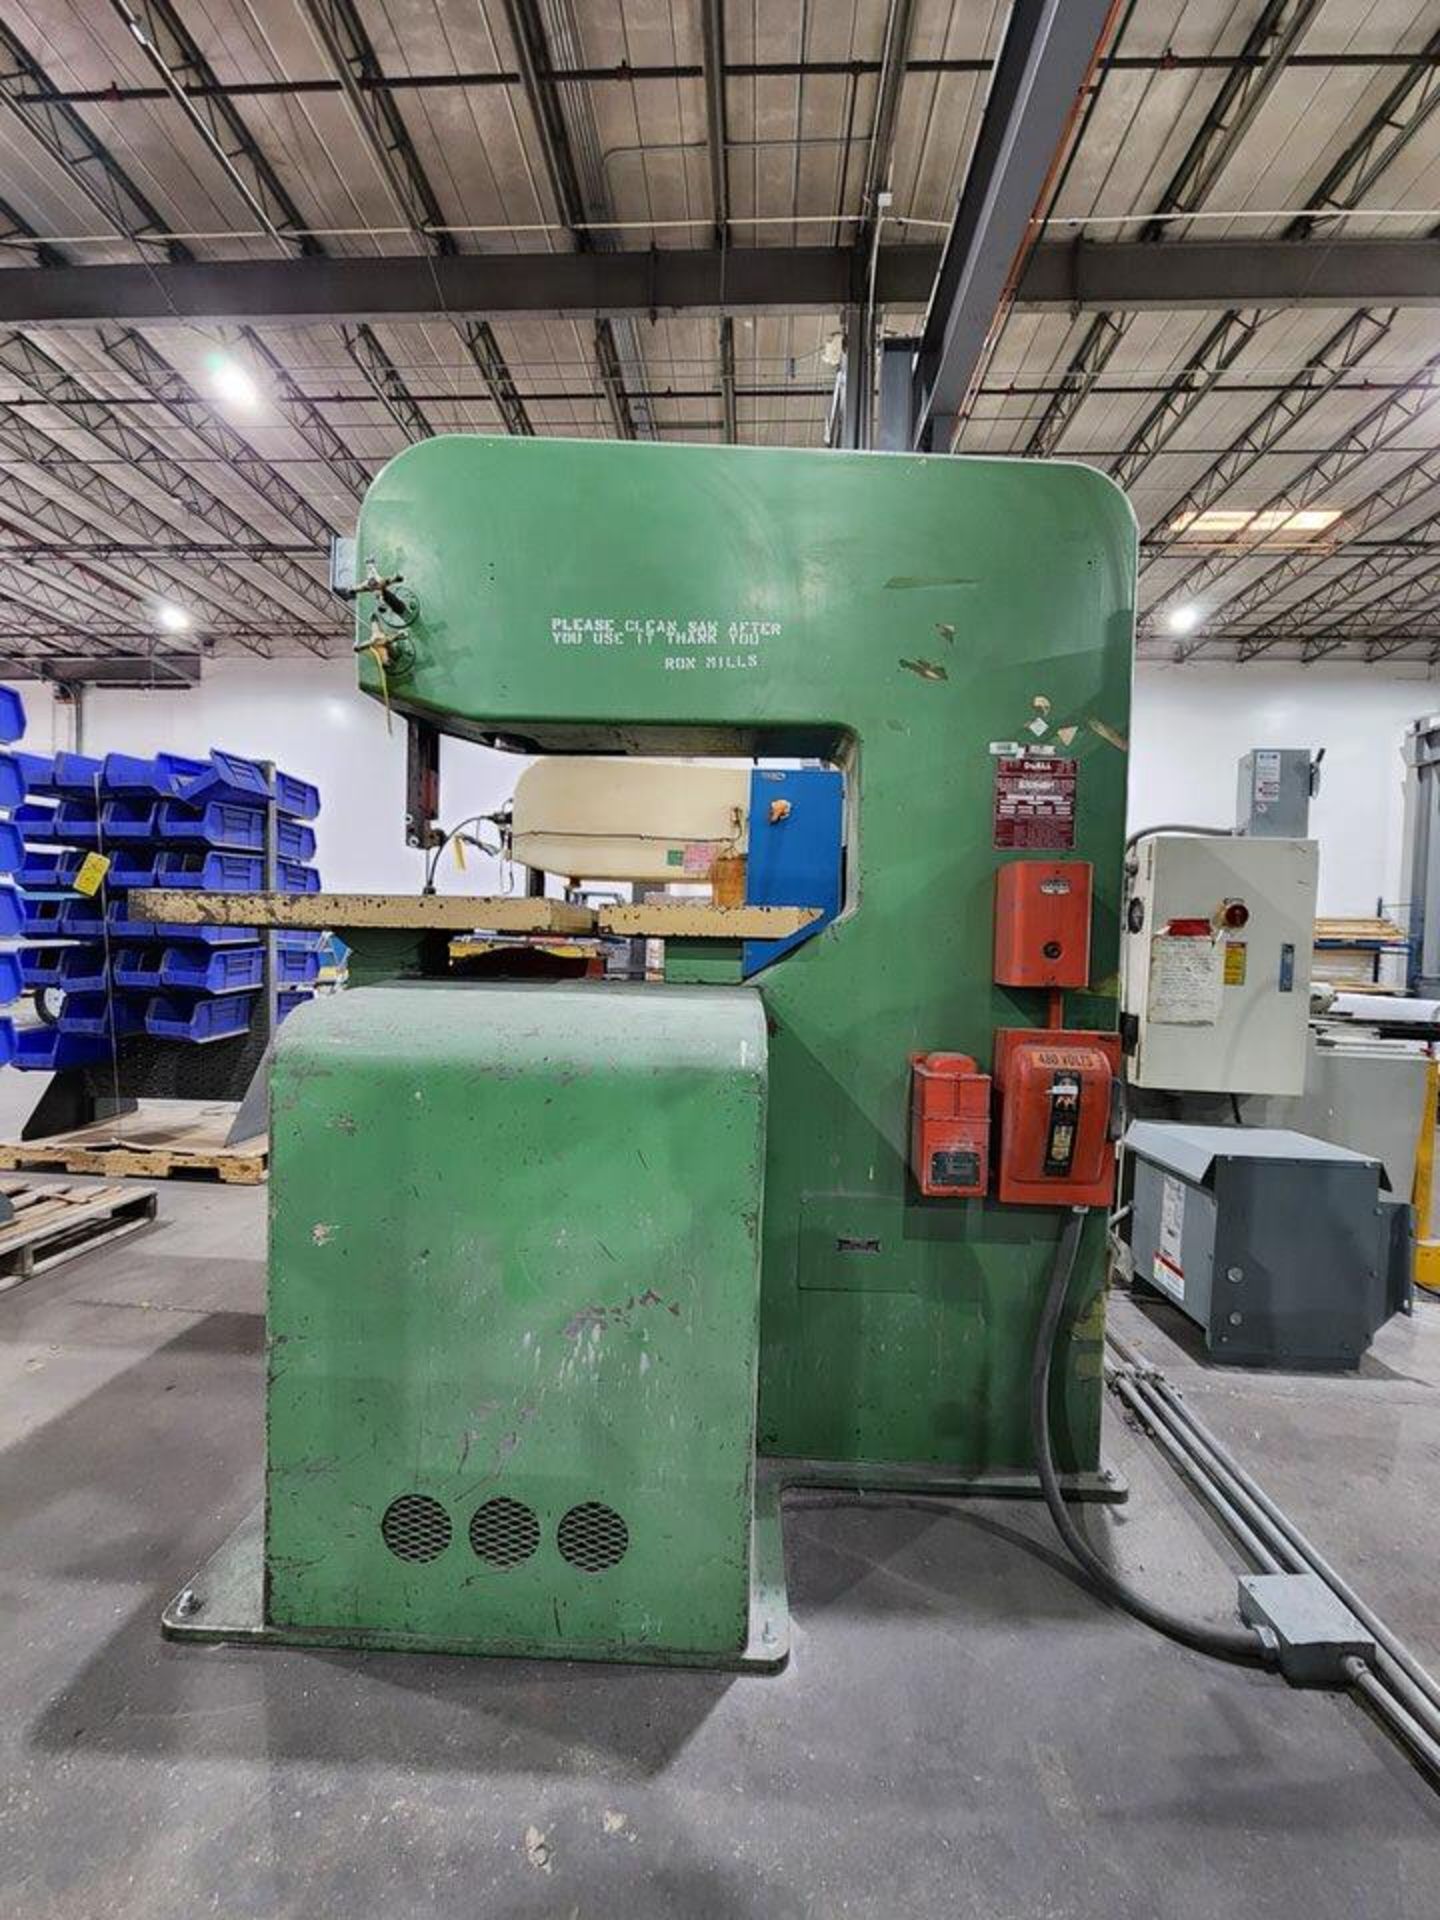 DoAll Z-36A 36" Vertical Bandsaw 440V, 3PH, 60HZ; (1) Table, 30" Dia; (1) Table, 20" x 17" - Image 15 of 17